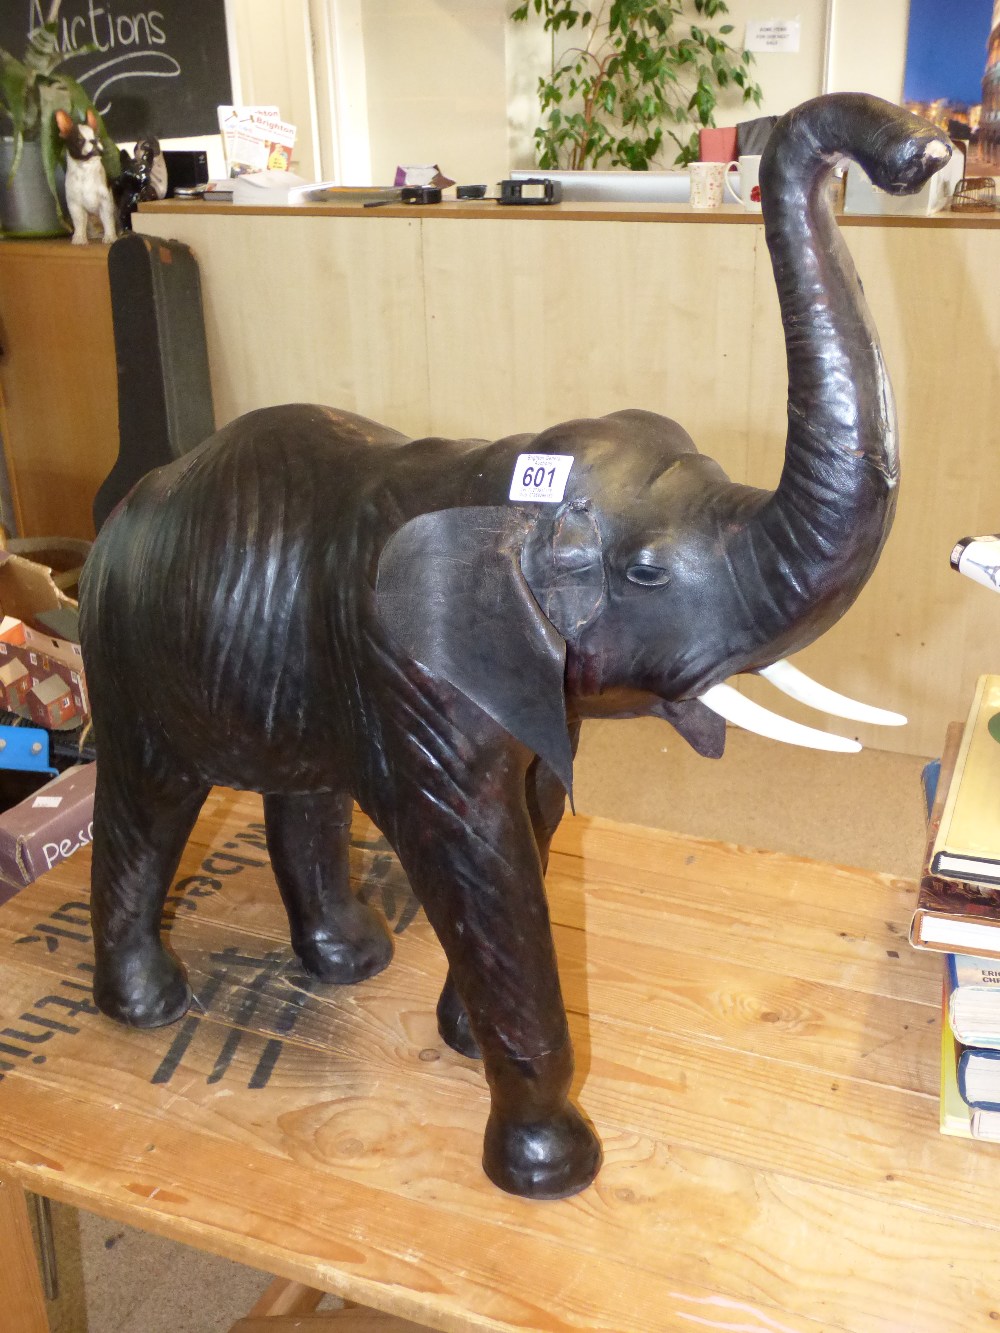 1940'S LEATHER CLAD ON STRAW & TIMBER MODEL OF A LEATHER ELEPHANT 65CM LONG X 70CM HIGH - Image 2 of 3